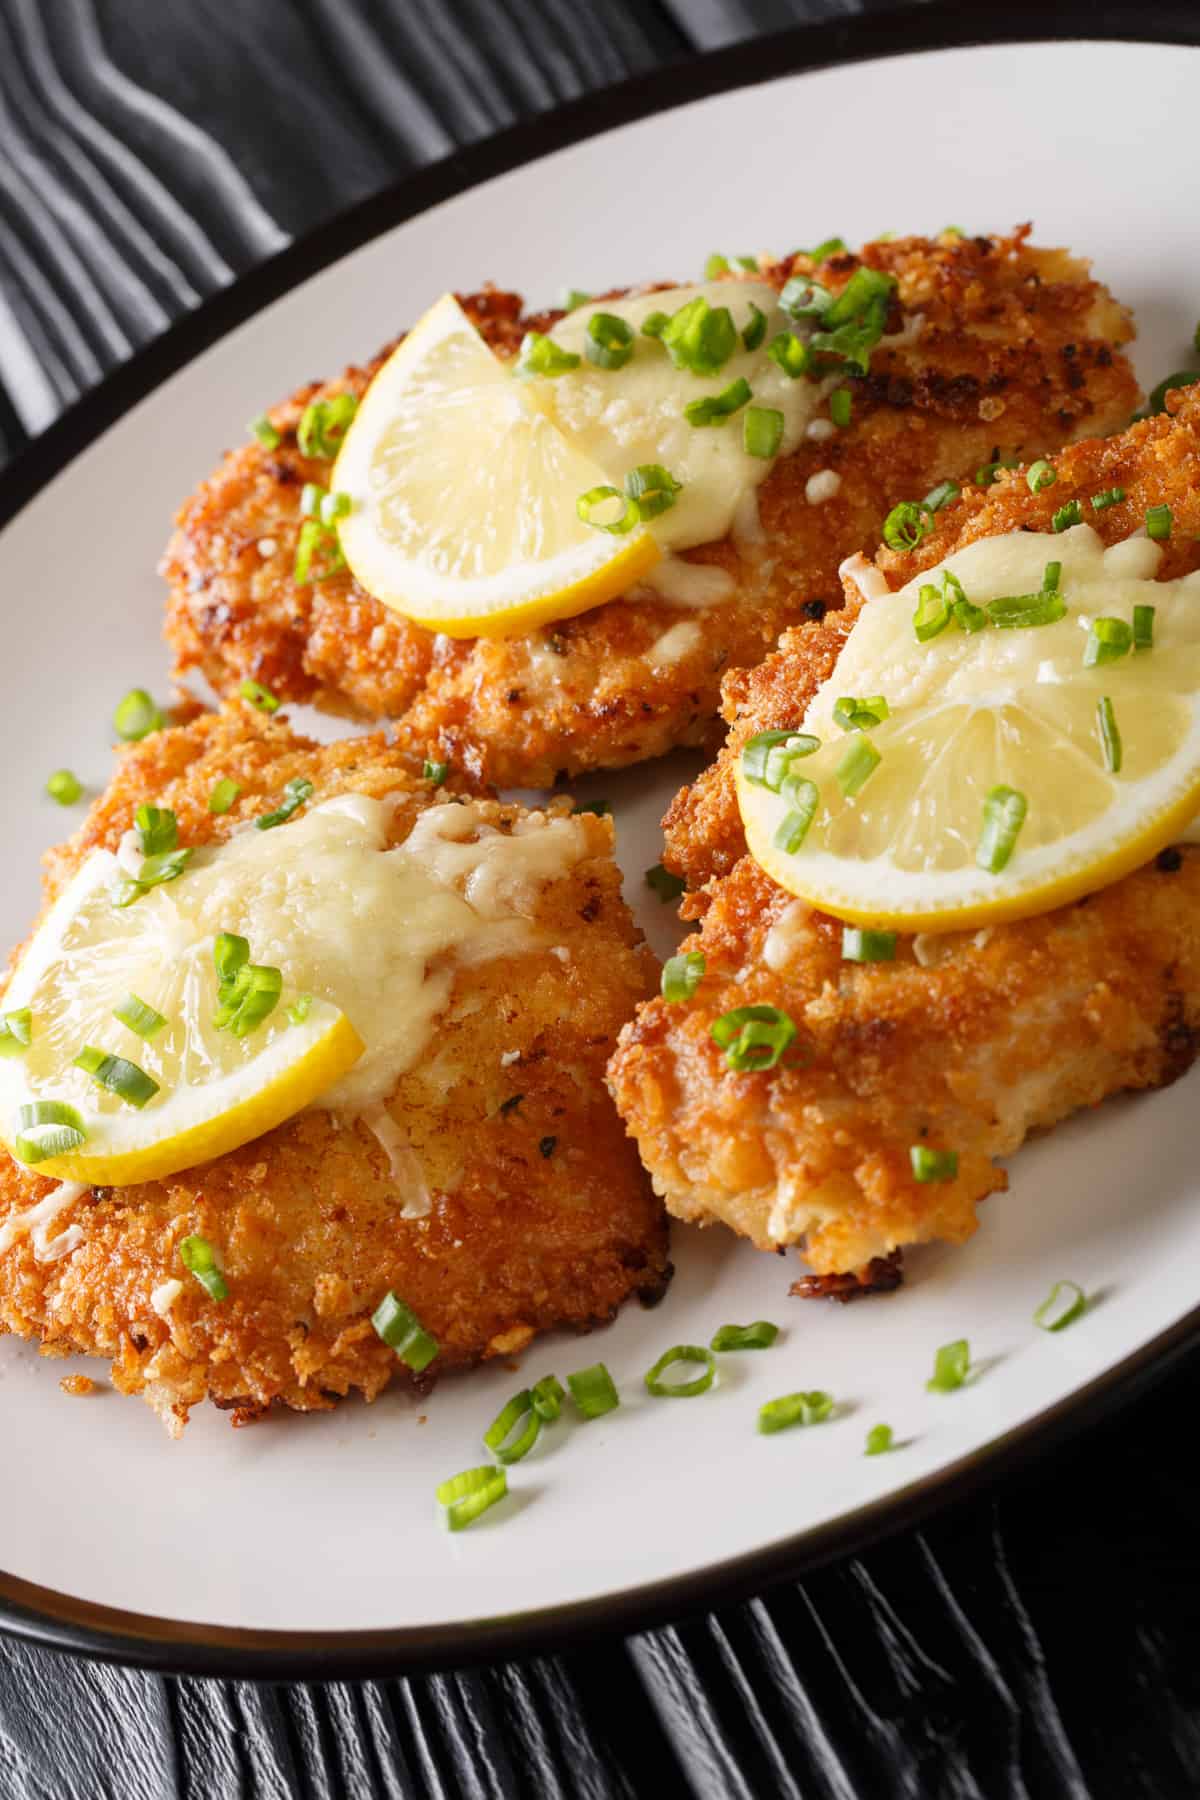 three breaded chicken breasts arranged on a plate and topped with lemon slices.